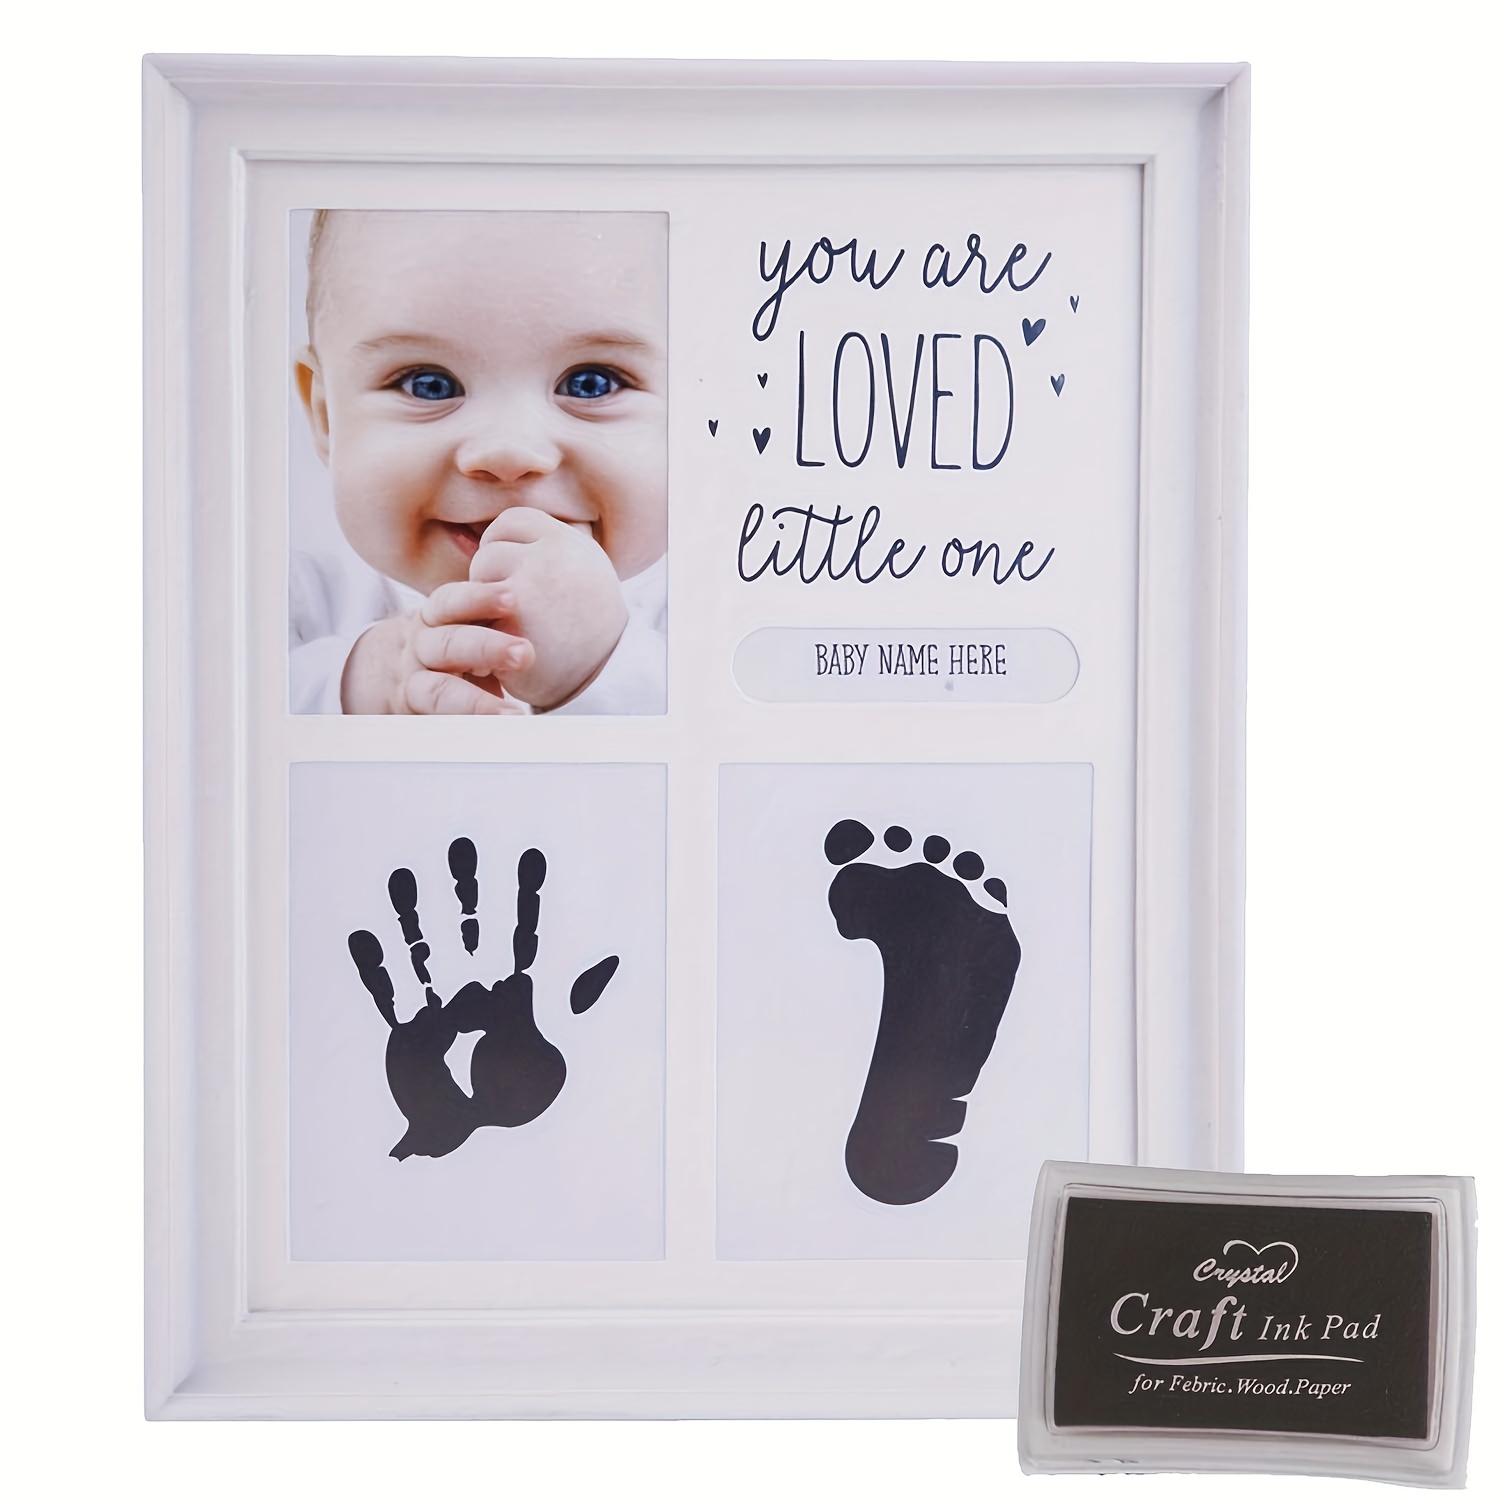 Smile: Family Handprint and Paint Craft Kıt DIY Baby